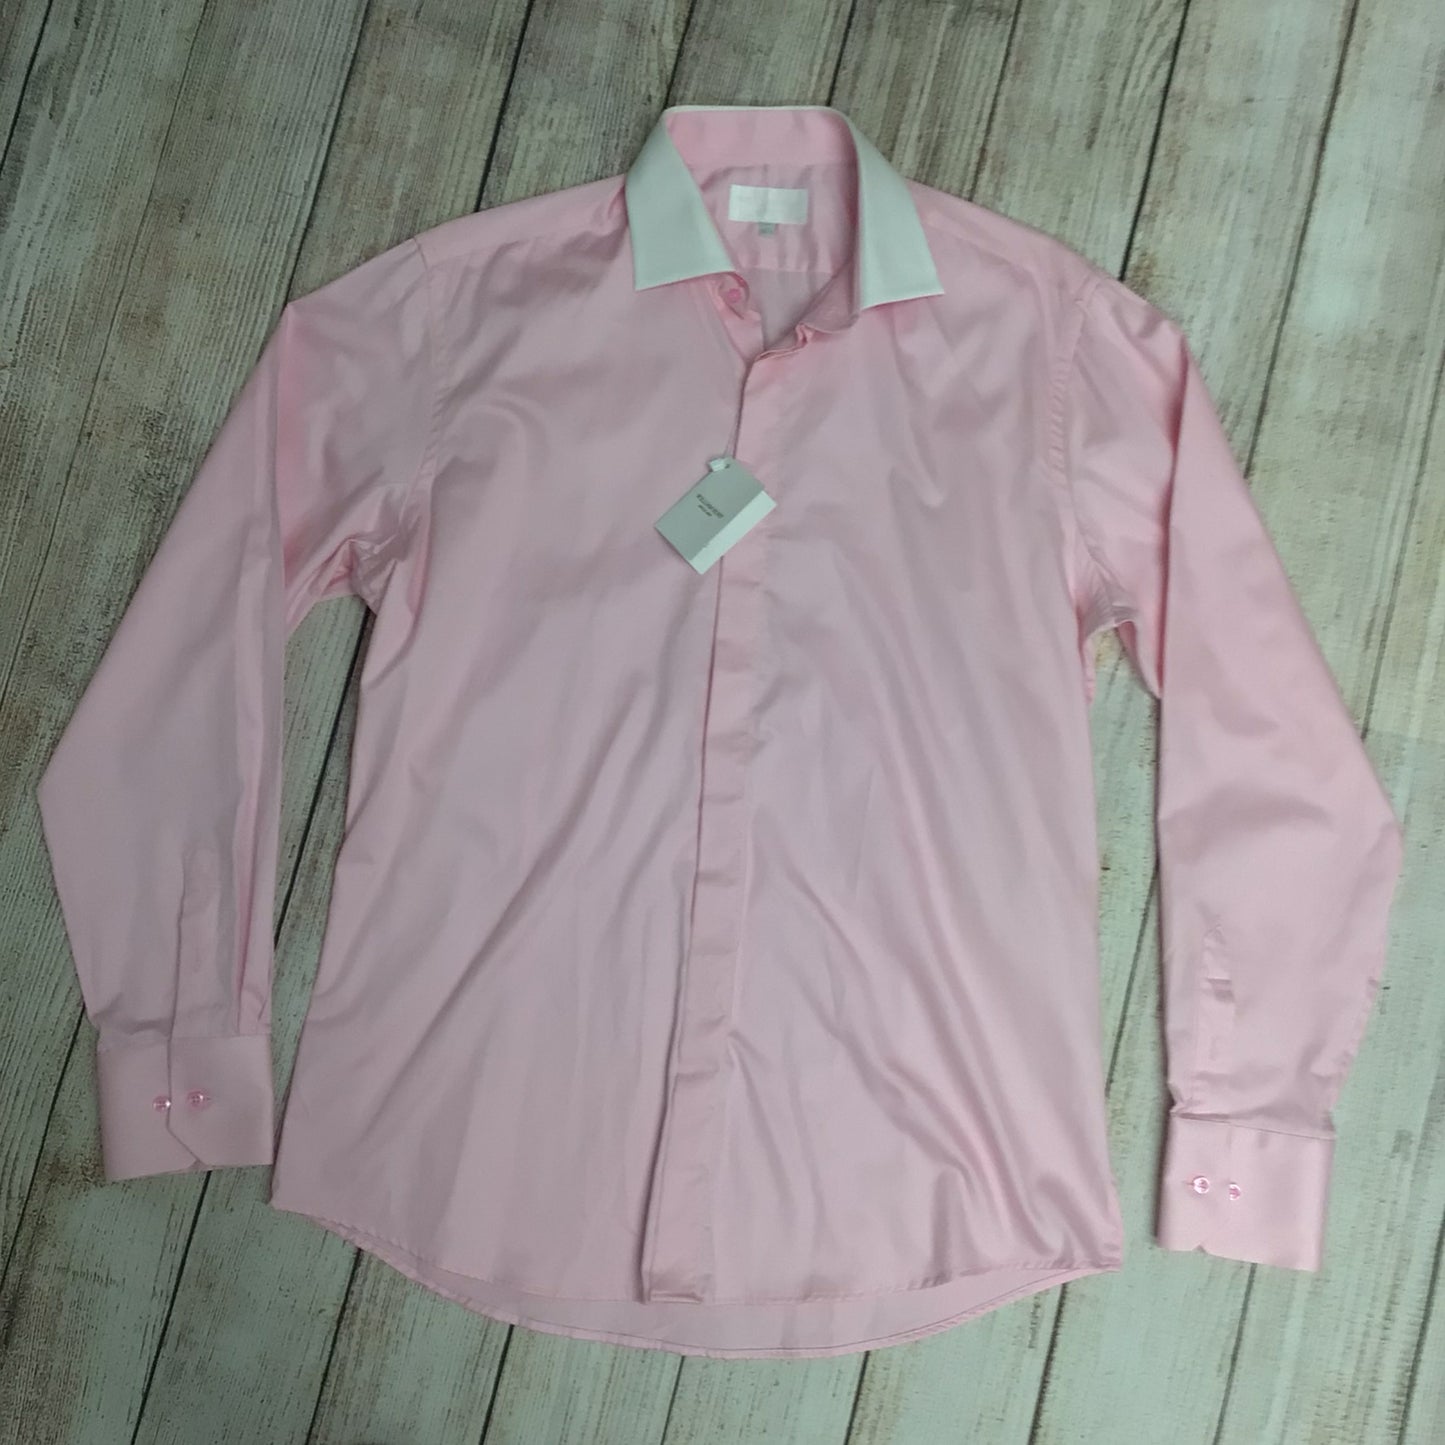 BNWT William Hunt Pink Long Sleeved Shirt 100% Cotton Size 16.5